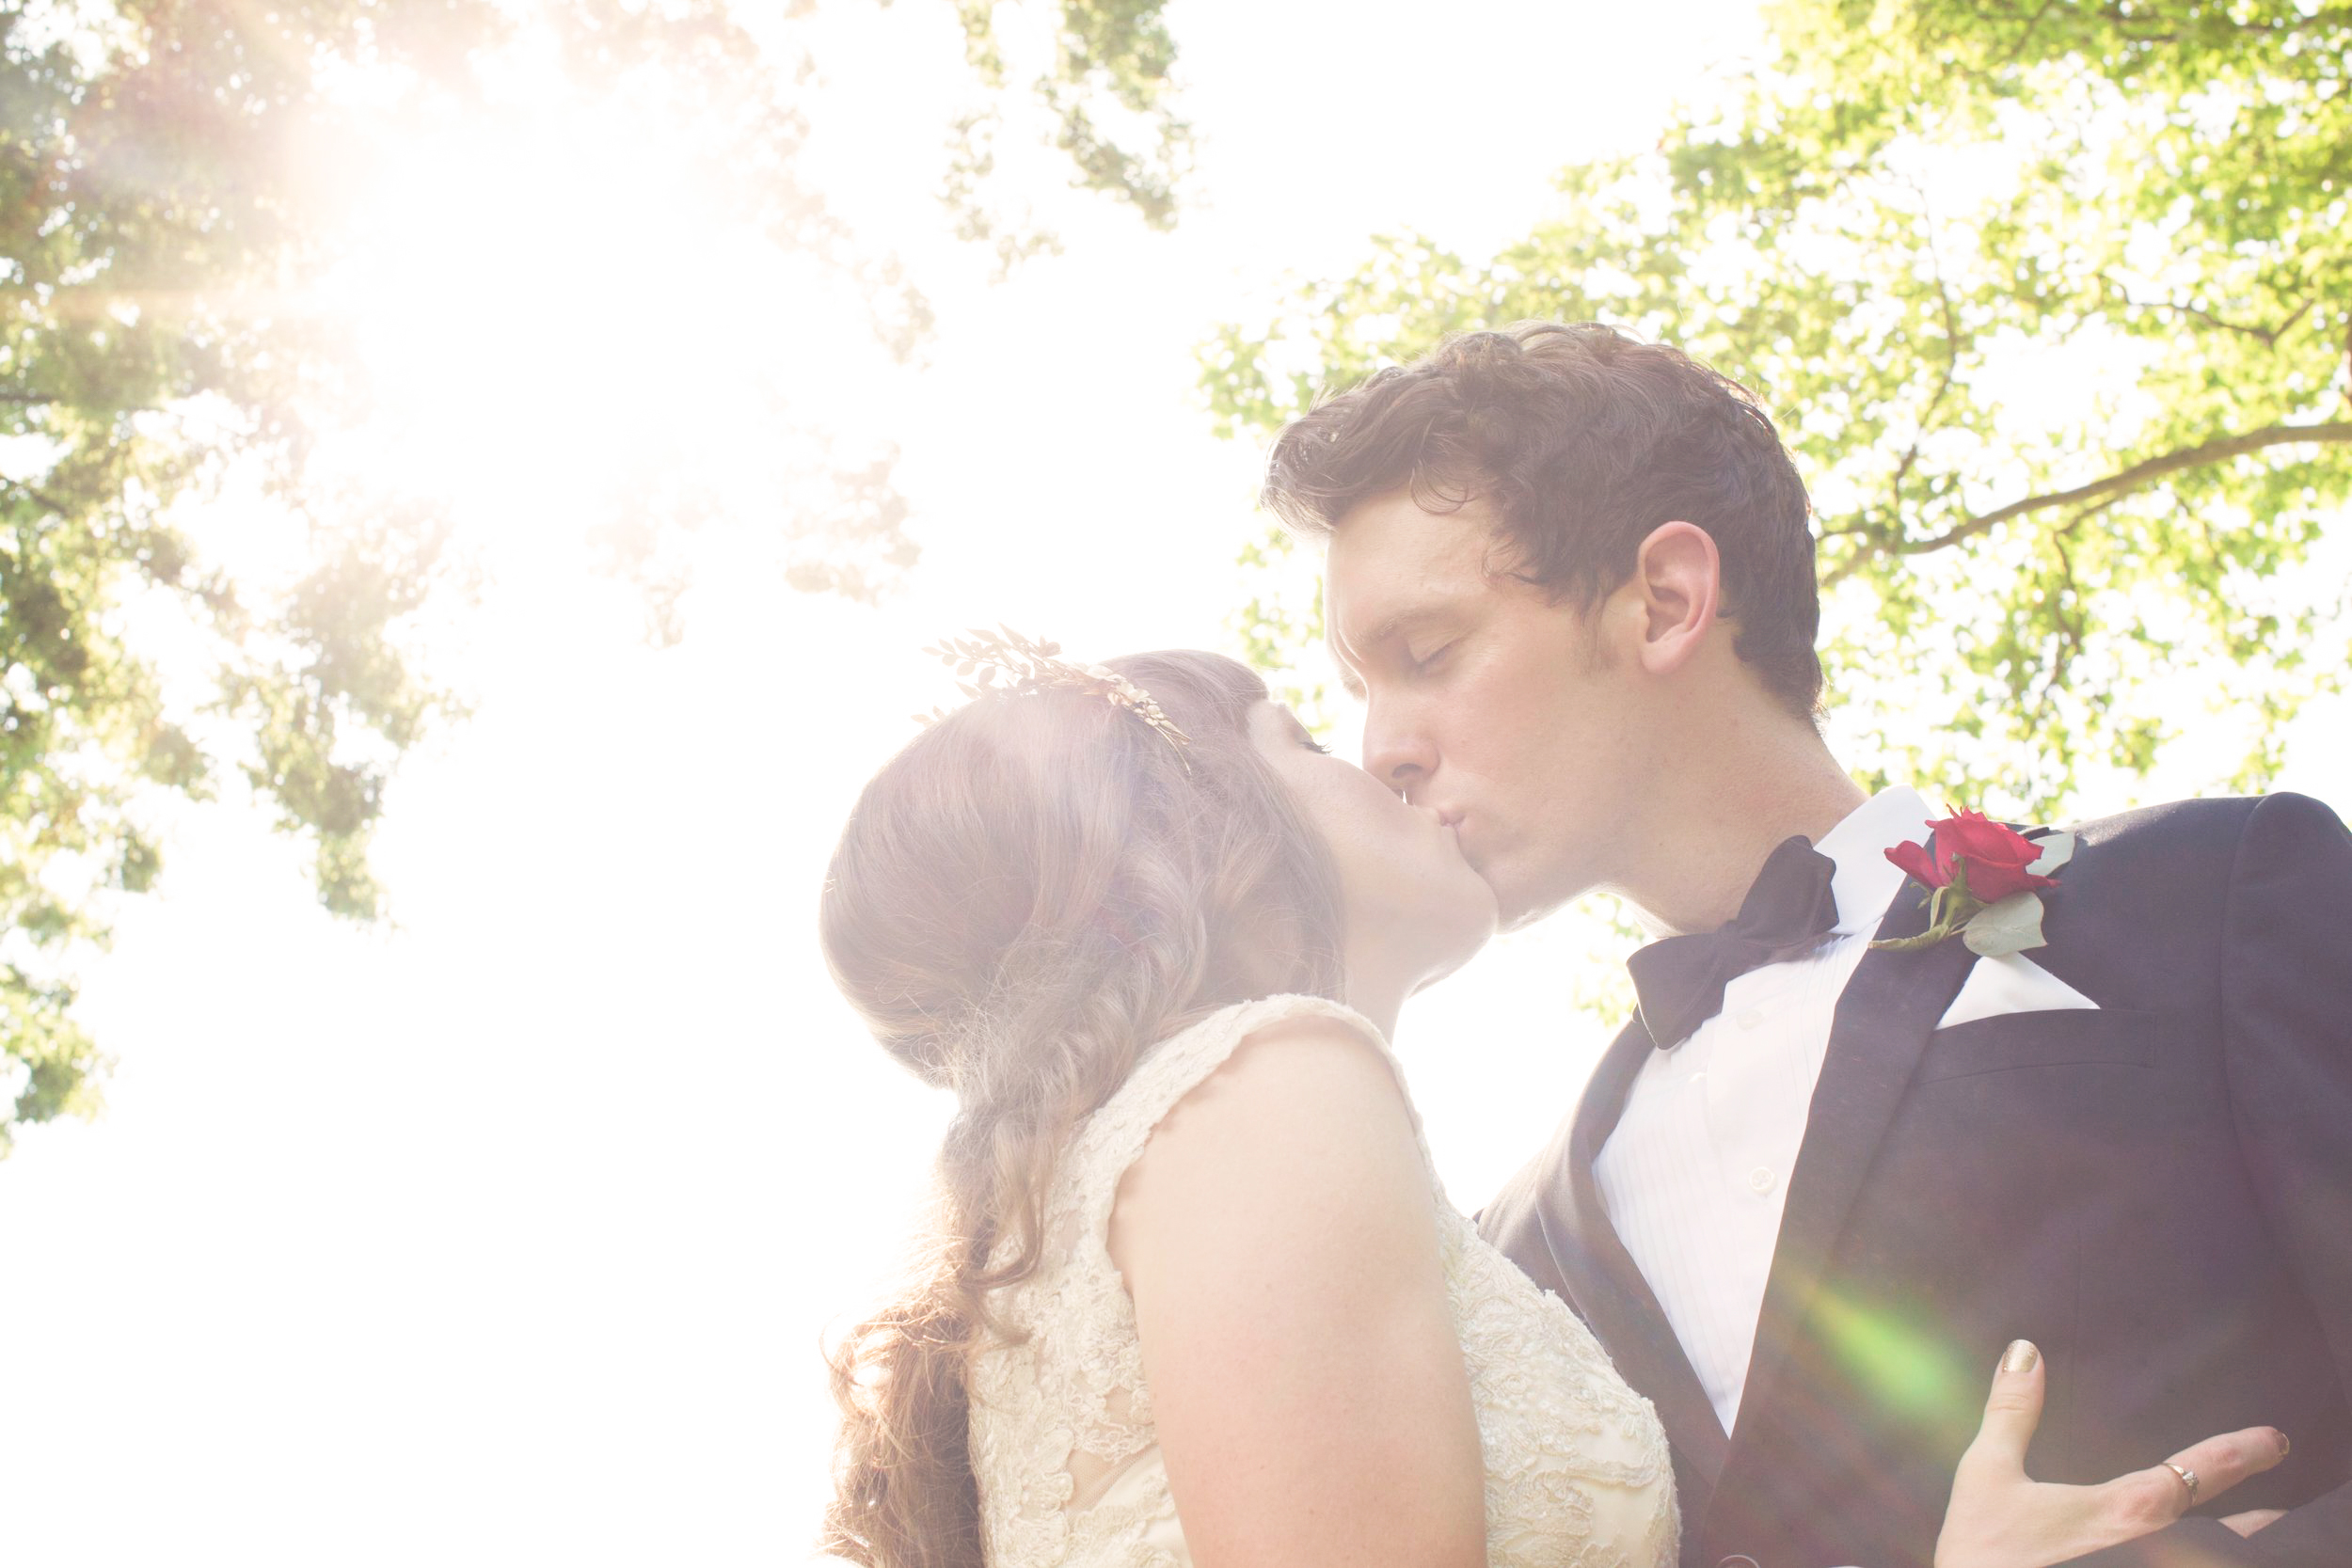 A wedding couple kiss in the forest.